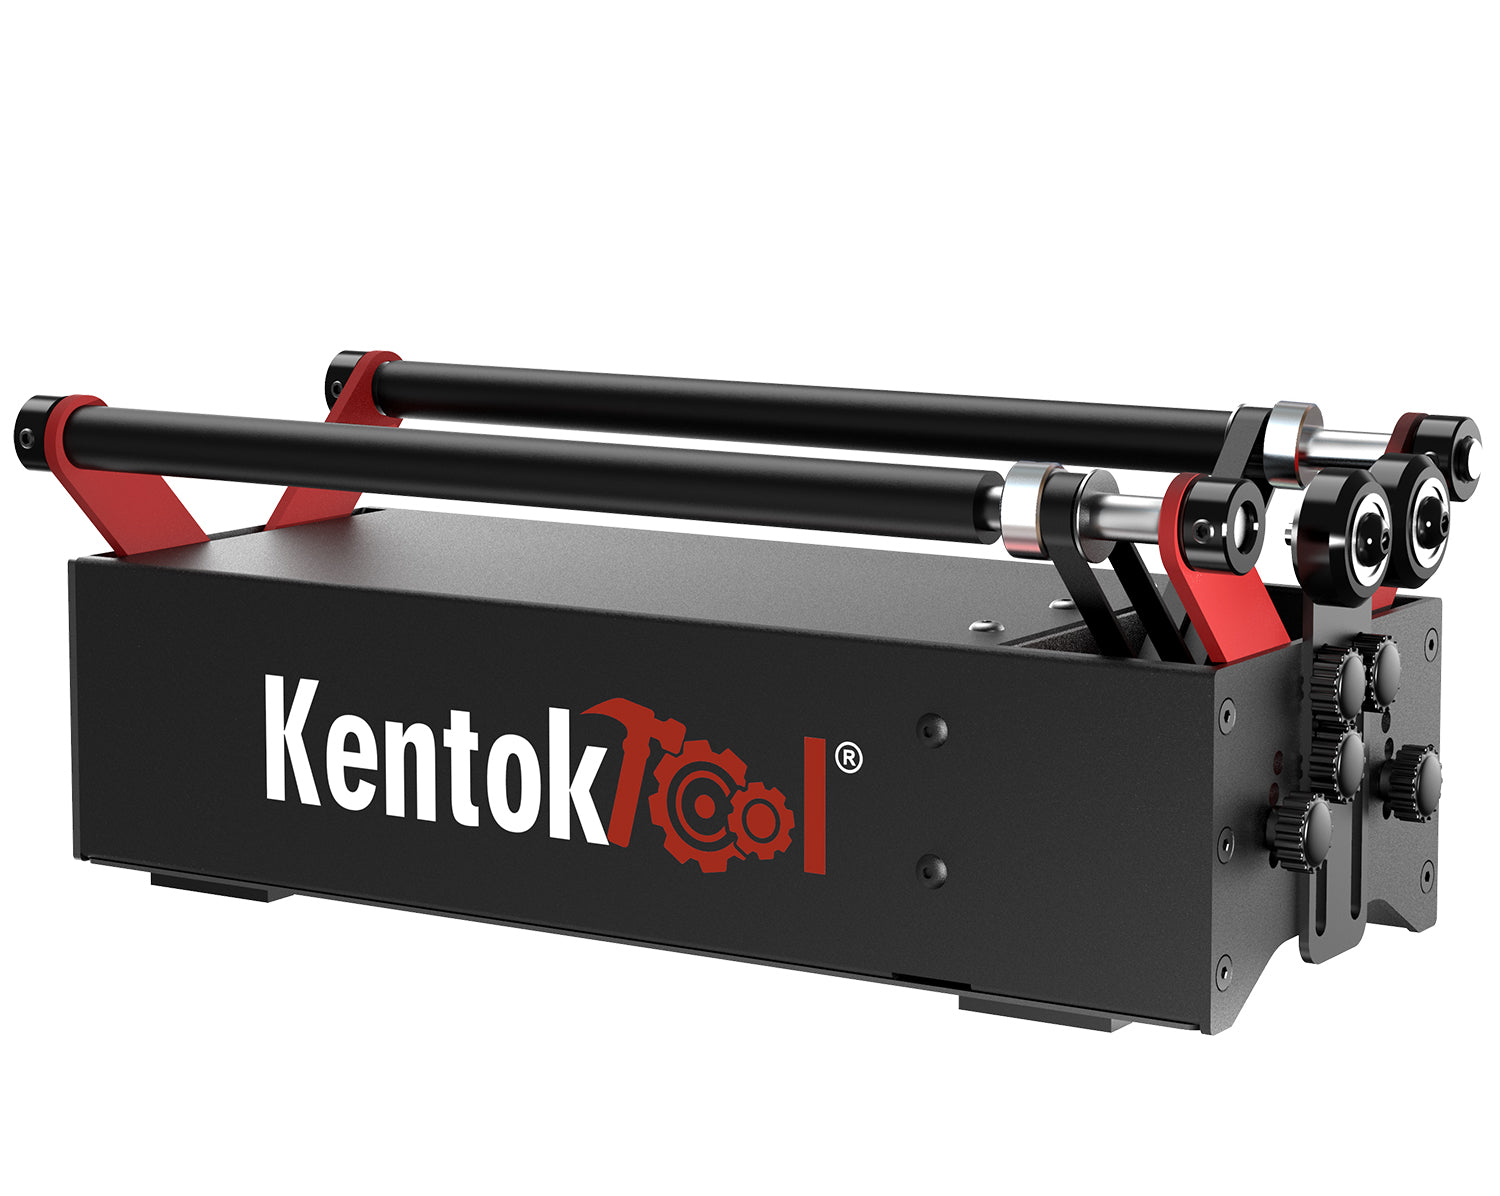 KENTOKTOOL LE400Plus 10 W Laser Engraving Machine, Operated by App,  High-Precision Engraving and Cutting